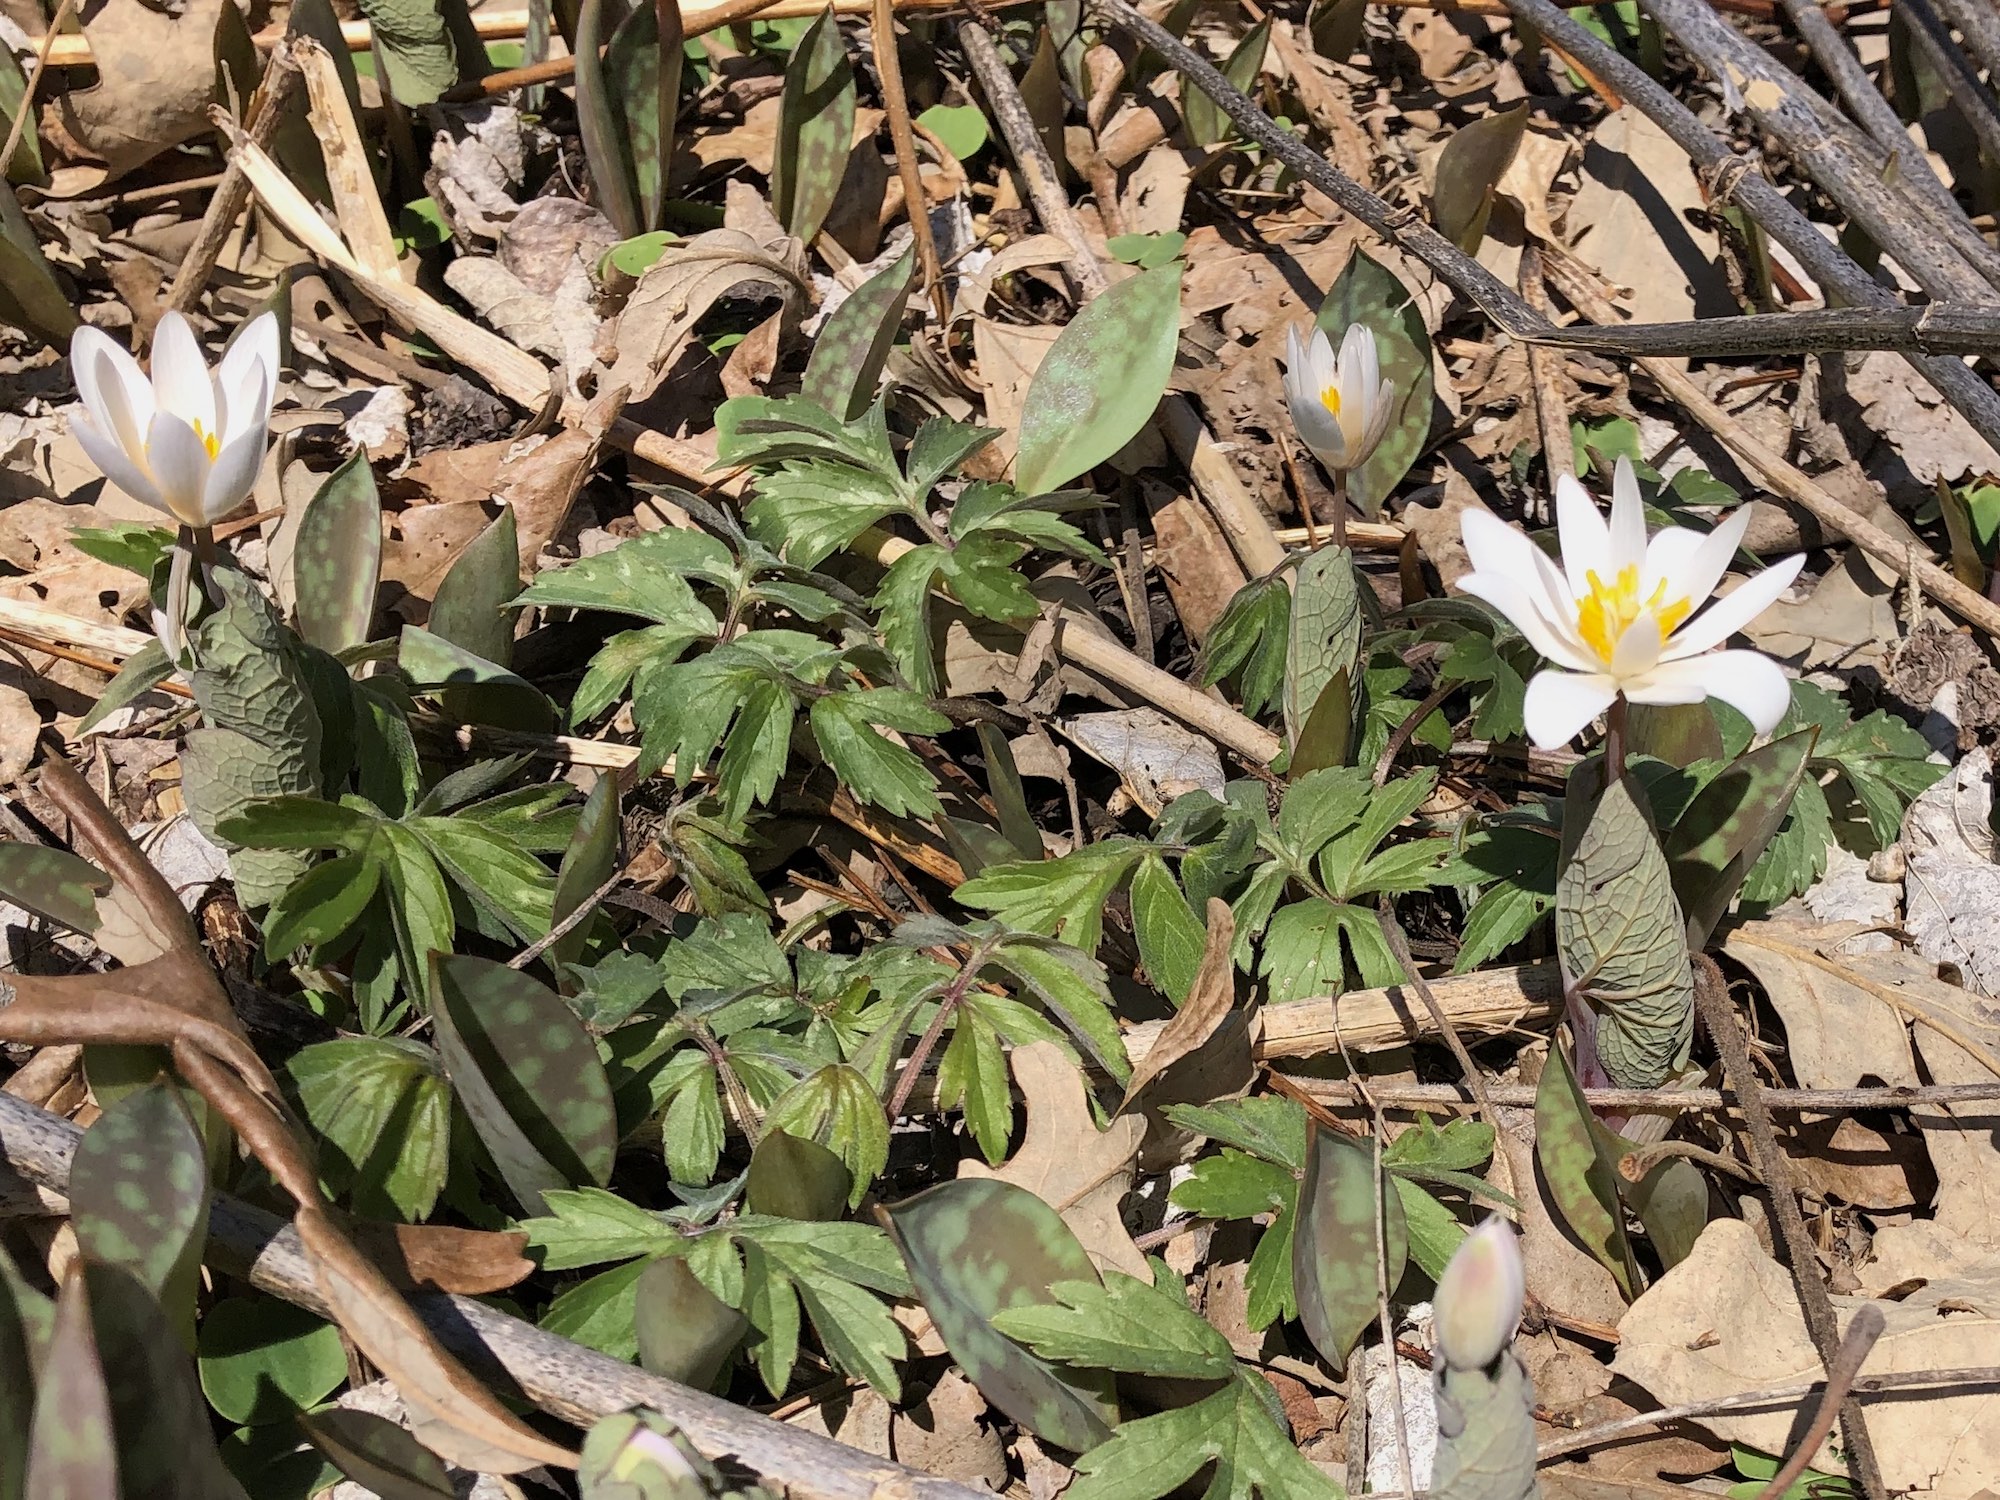 Bloodroot near Council Ring on April 15, 2019.